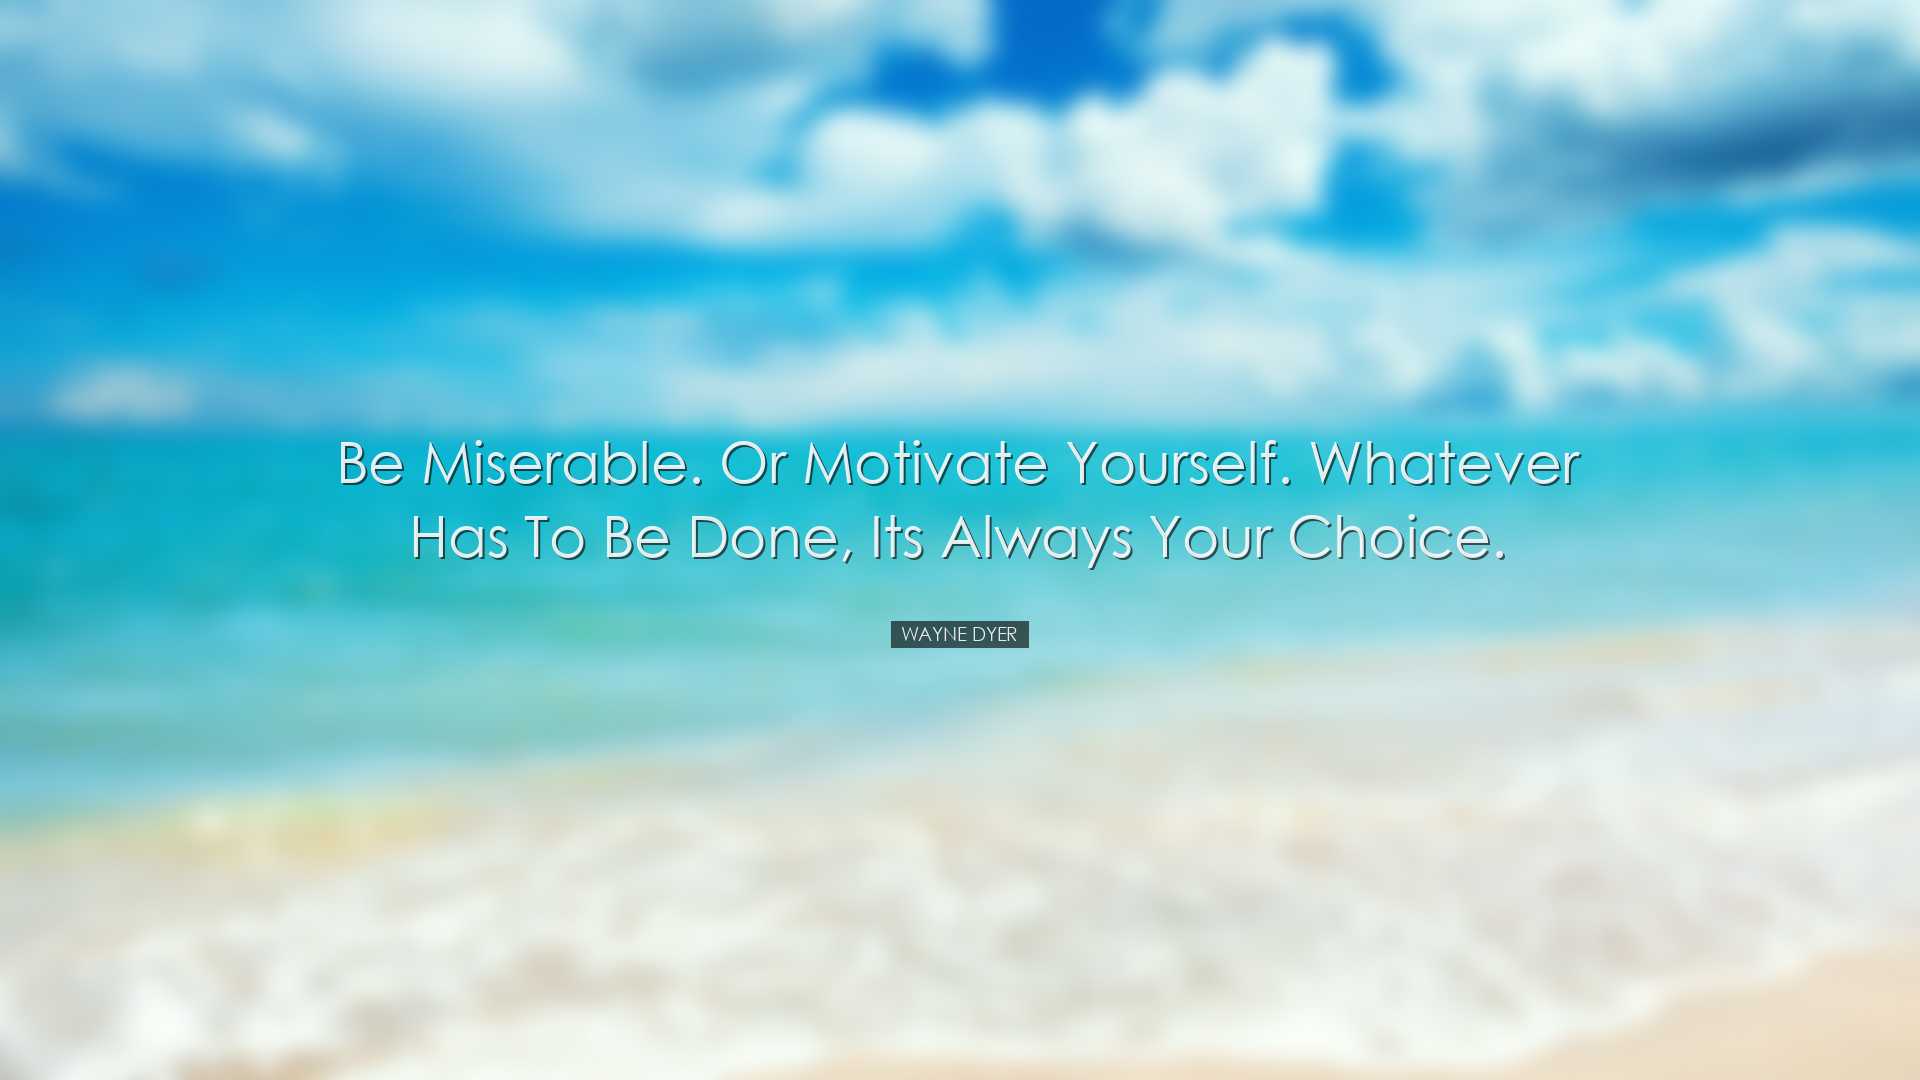 Be miserable. Or motivate yourself. Whatever has to be done, its a